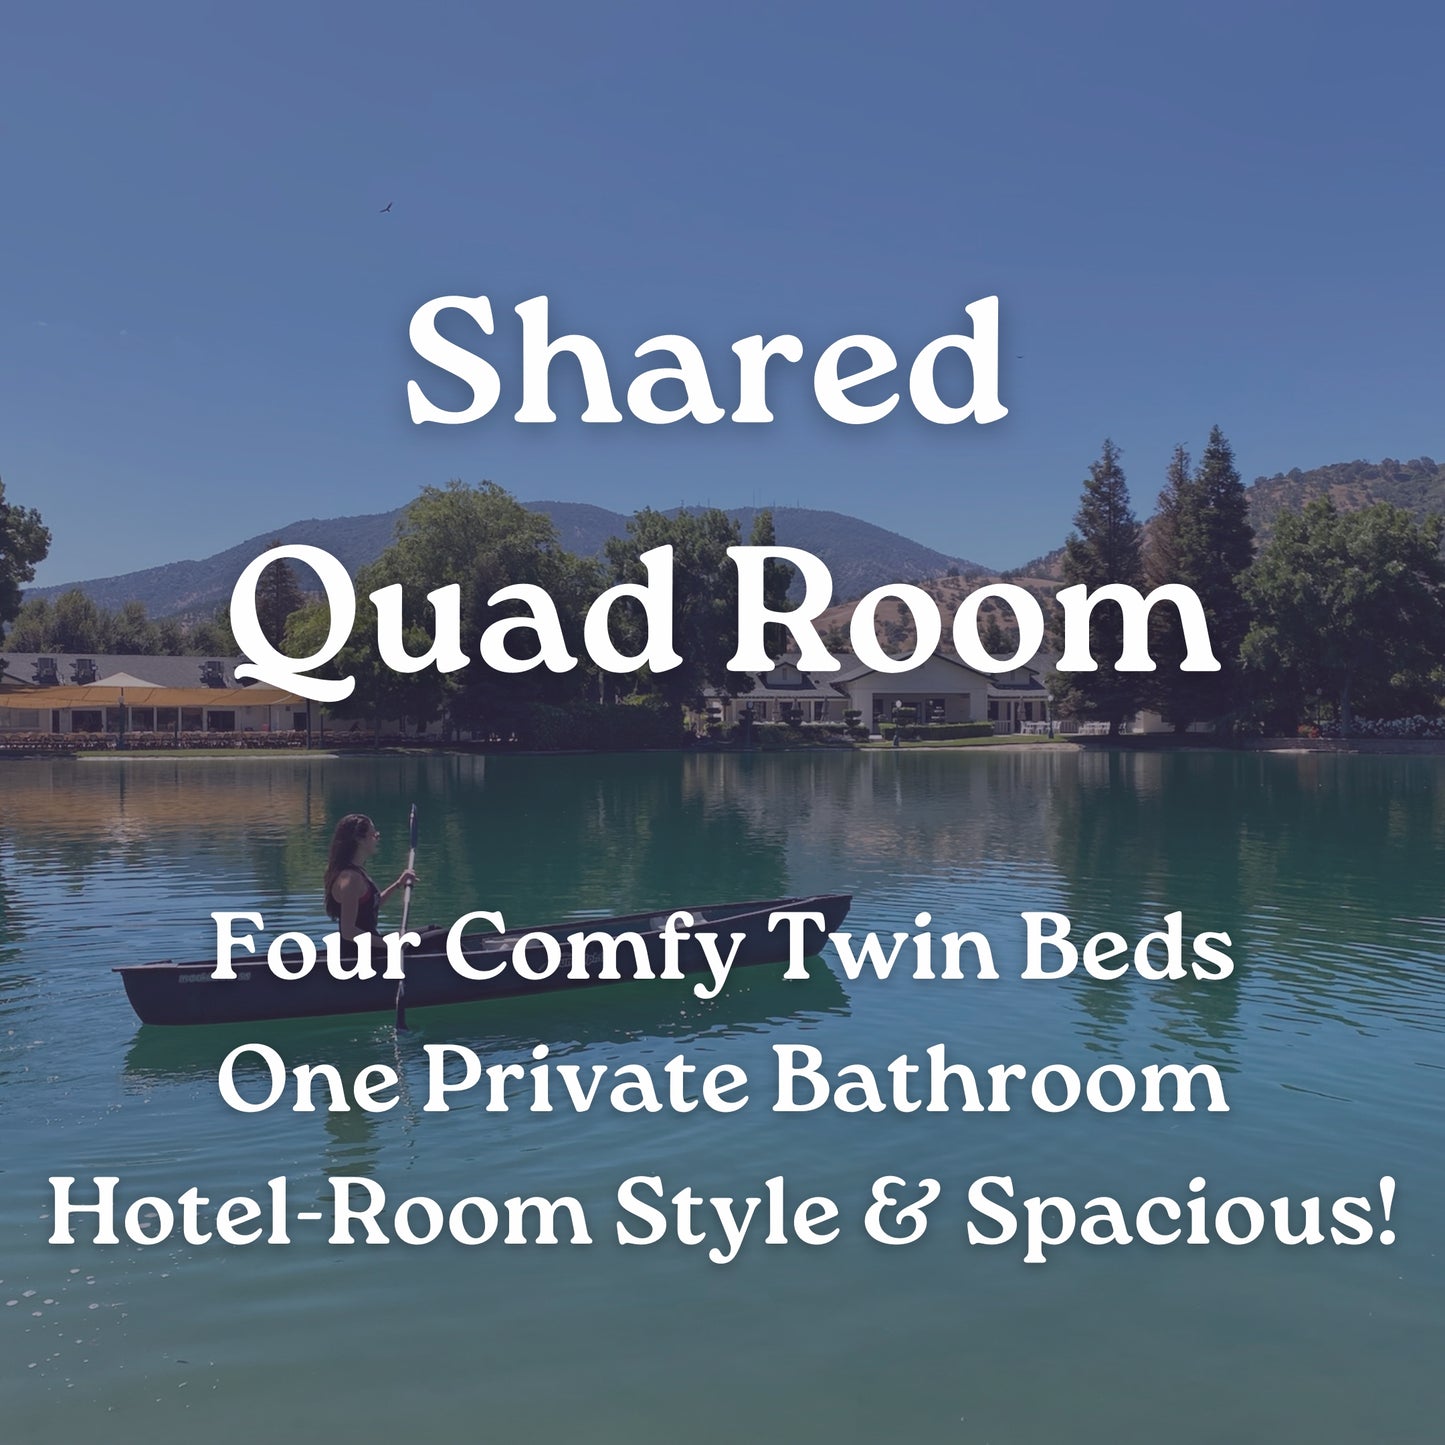 4 Person Shared Pvt Room (Price Is Per Person) 2023 Pricing Special until 12/31